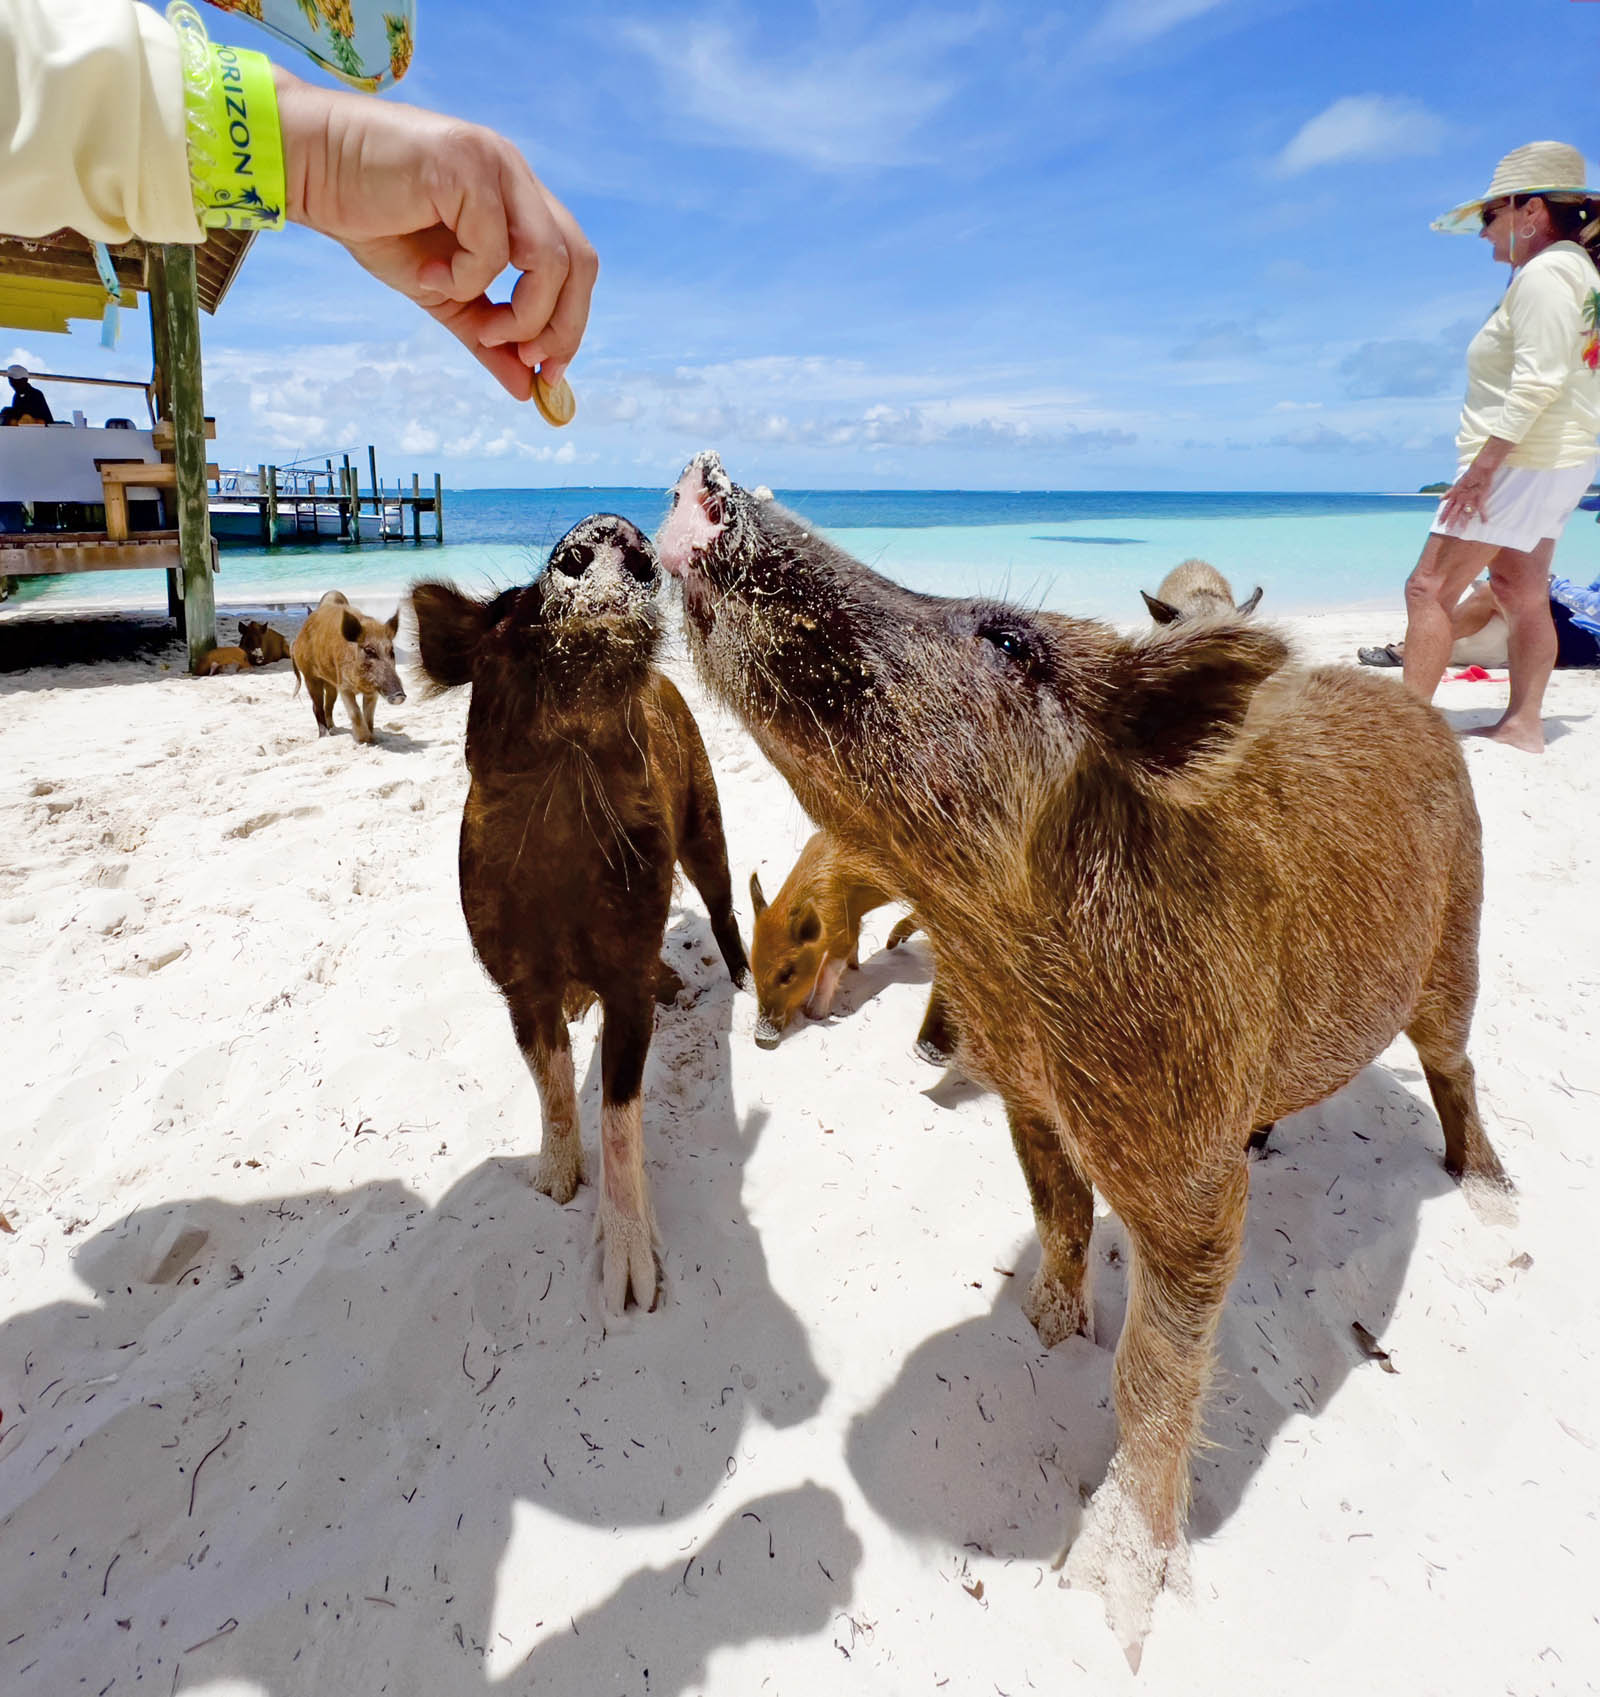 Famous swimming pigs of the Abaco Bahamas.